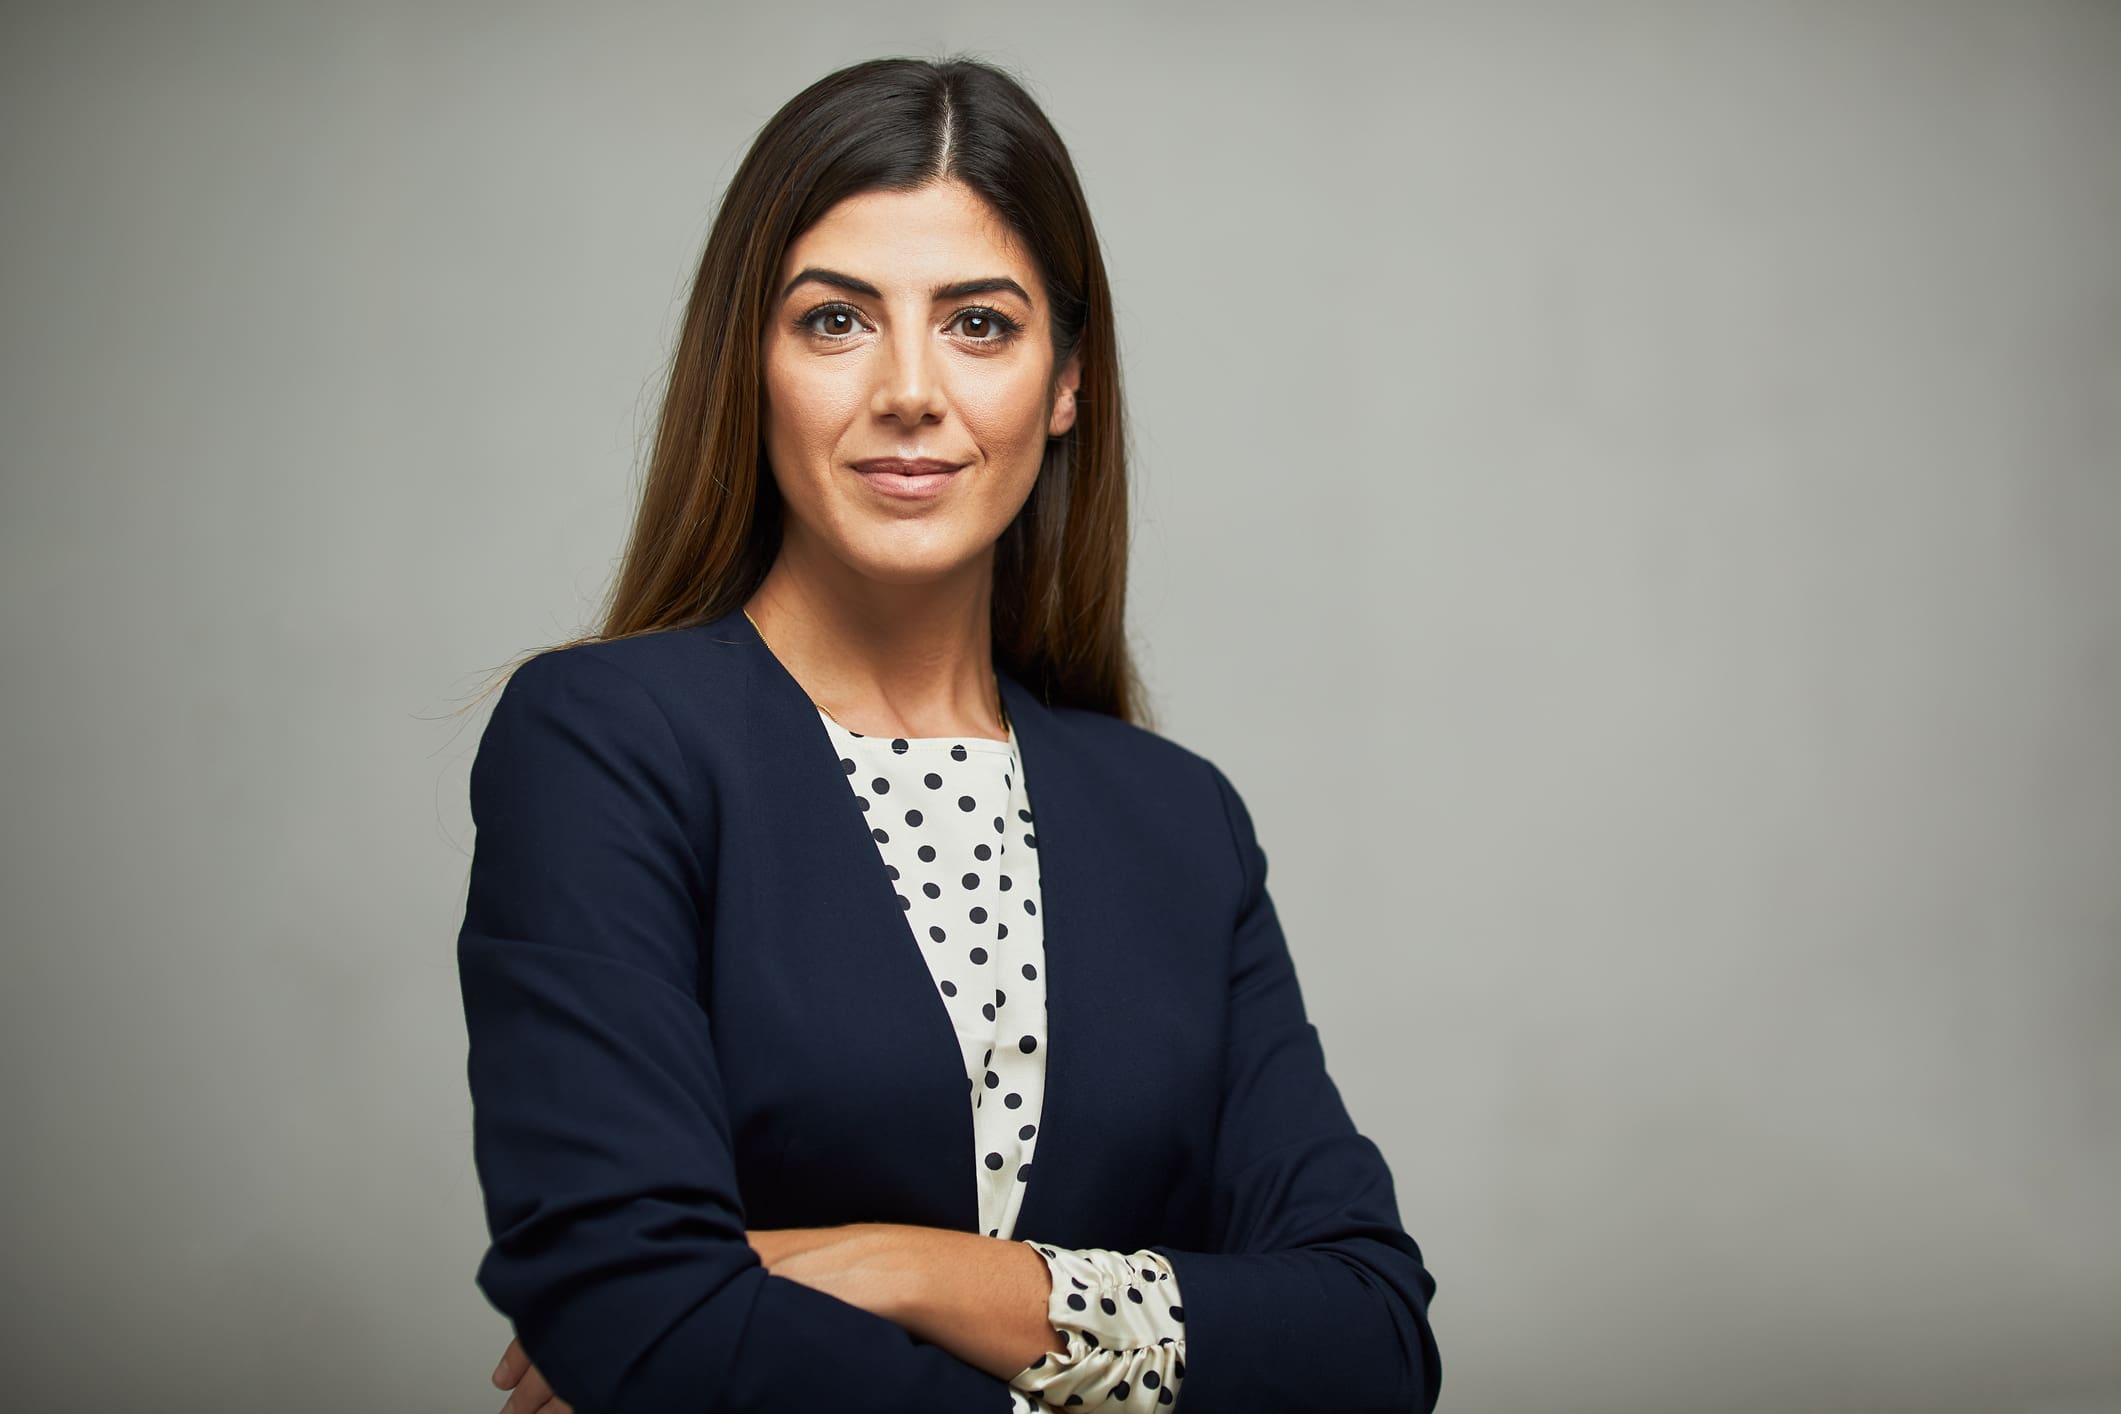 A woman in business attire stands against a plain background and smiles into the camera